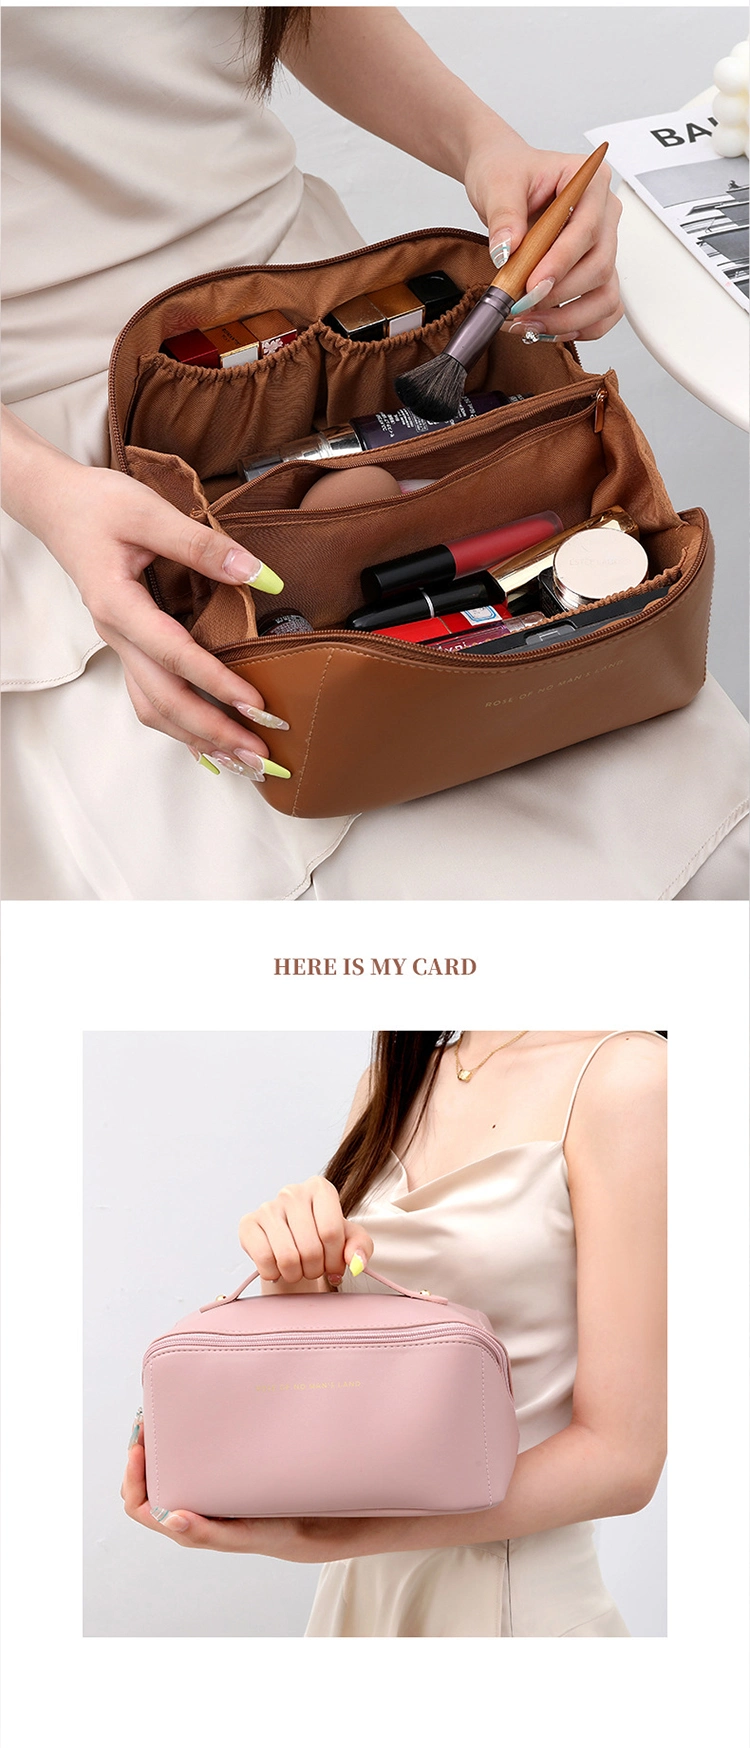 Custom PU Leather Makeup Bag Pouch Skincare Cosmetic Partition Storage Waterproof Travel Toiletry Make up Cosmetic Bags